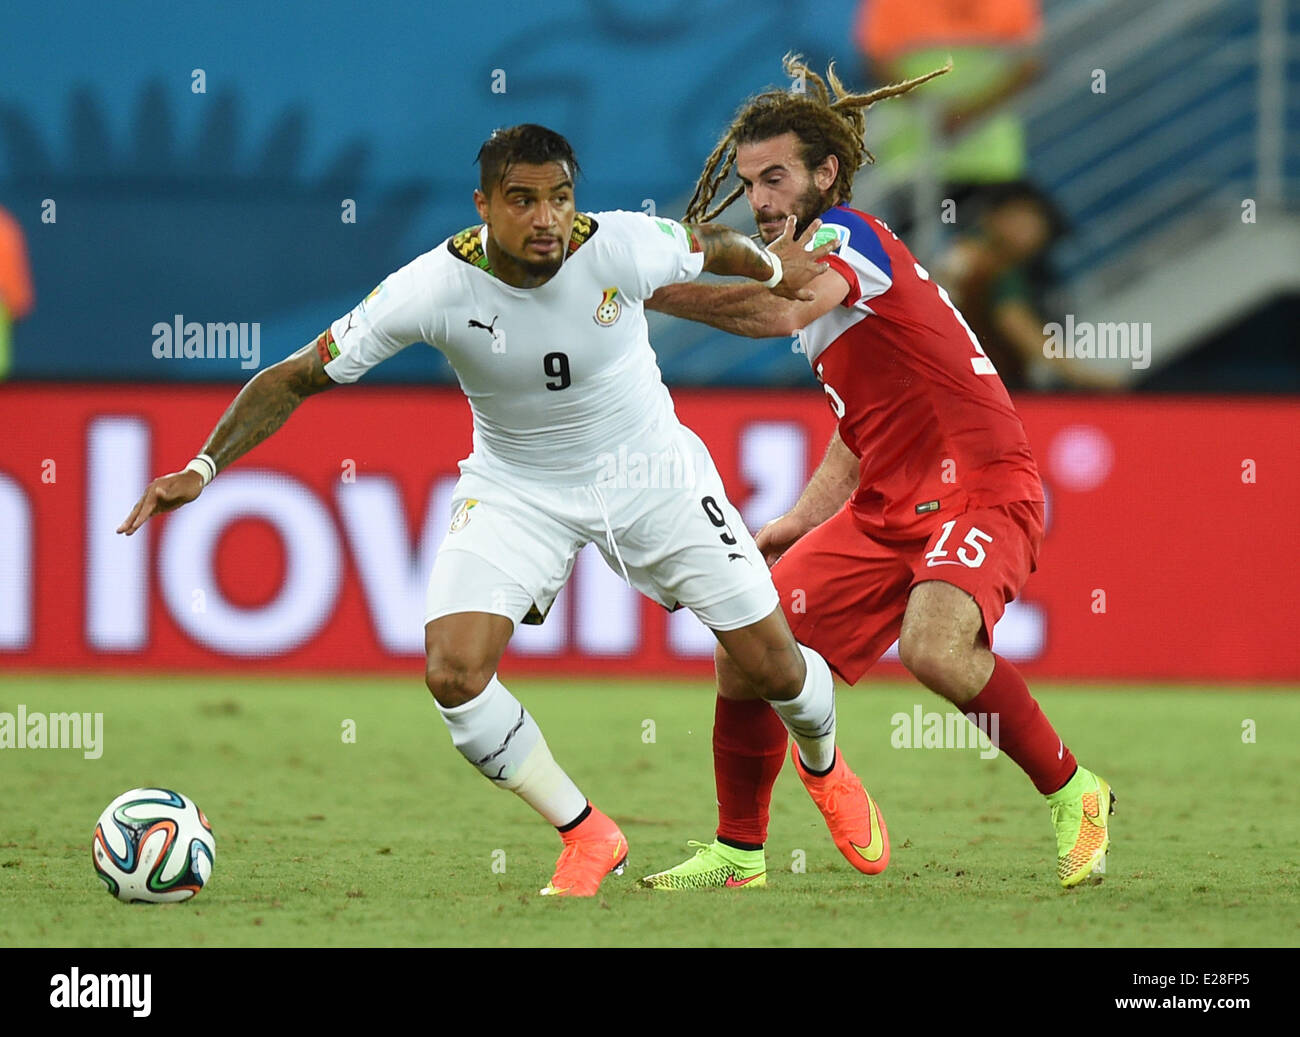 Natal, Brazil. 16th June, 2014. Kevin Prince Boateng (L) of Ghana in action against Kyle Beckerman of USA during the FIFA World Cup 2014 group G preliminary round match between Ghana and the USA at the Estadio Arena das Dunas Stadium in Natal, Brazil, 16 June 2014. Credit:  dpa picture alliance/Alamy Live News Stock Photo